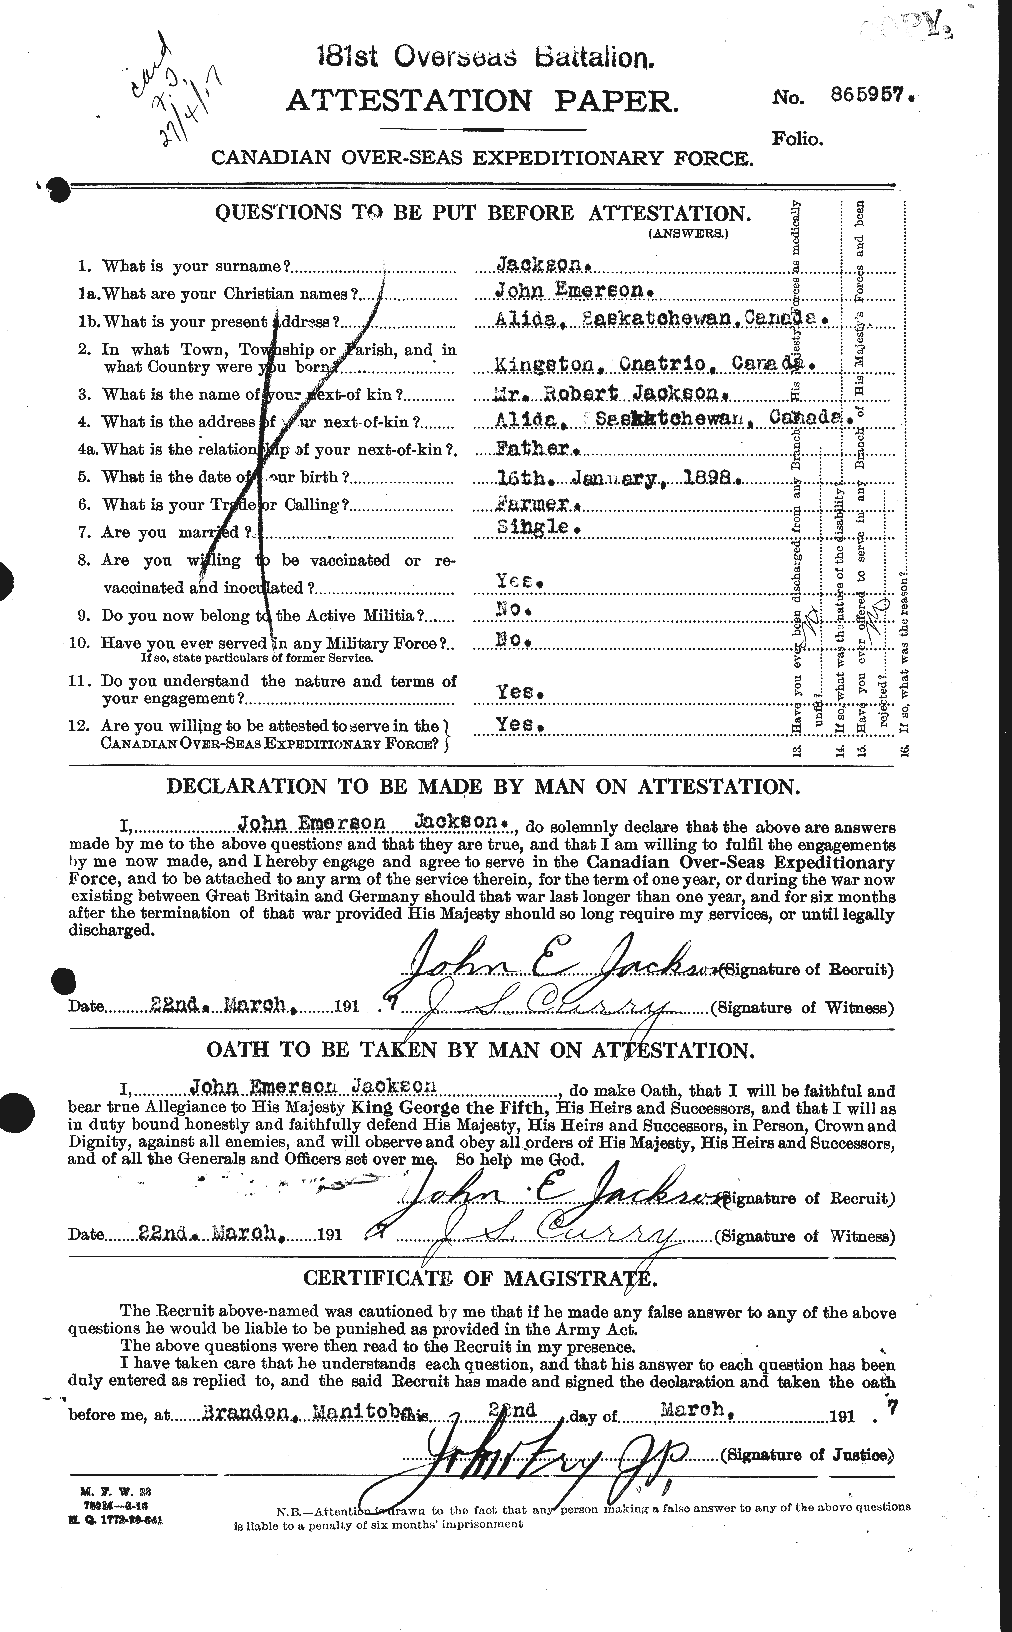 Personnel Records of the First World War - CEF 414308a